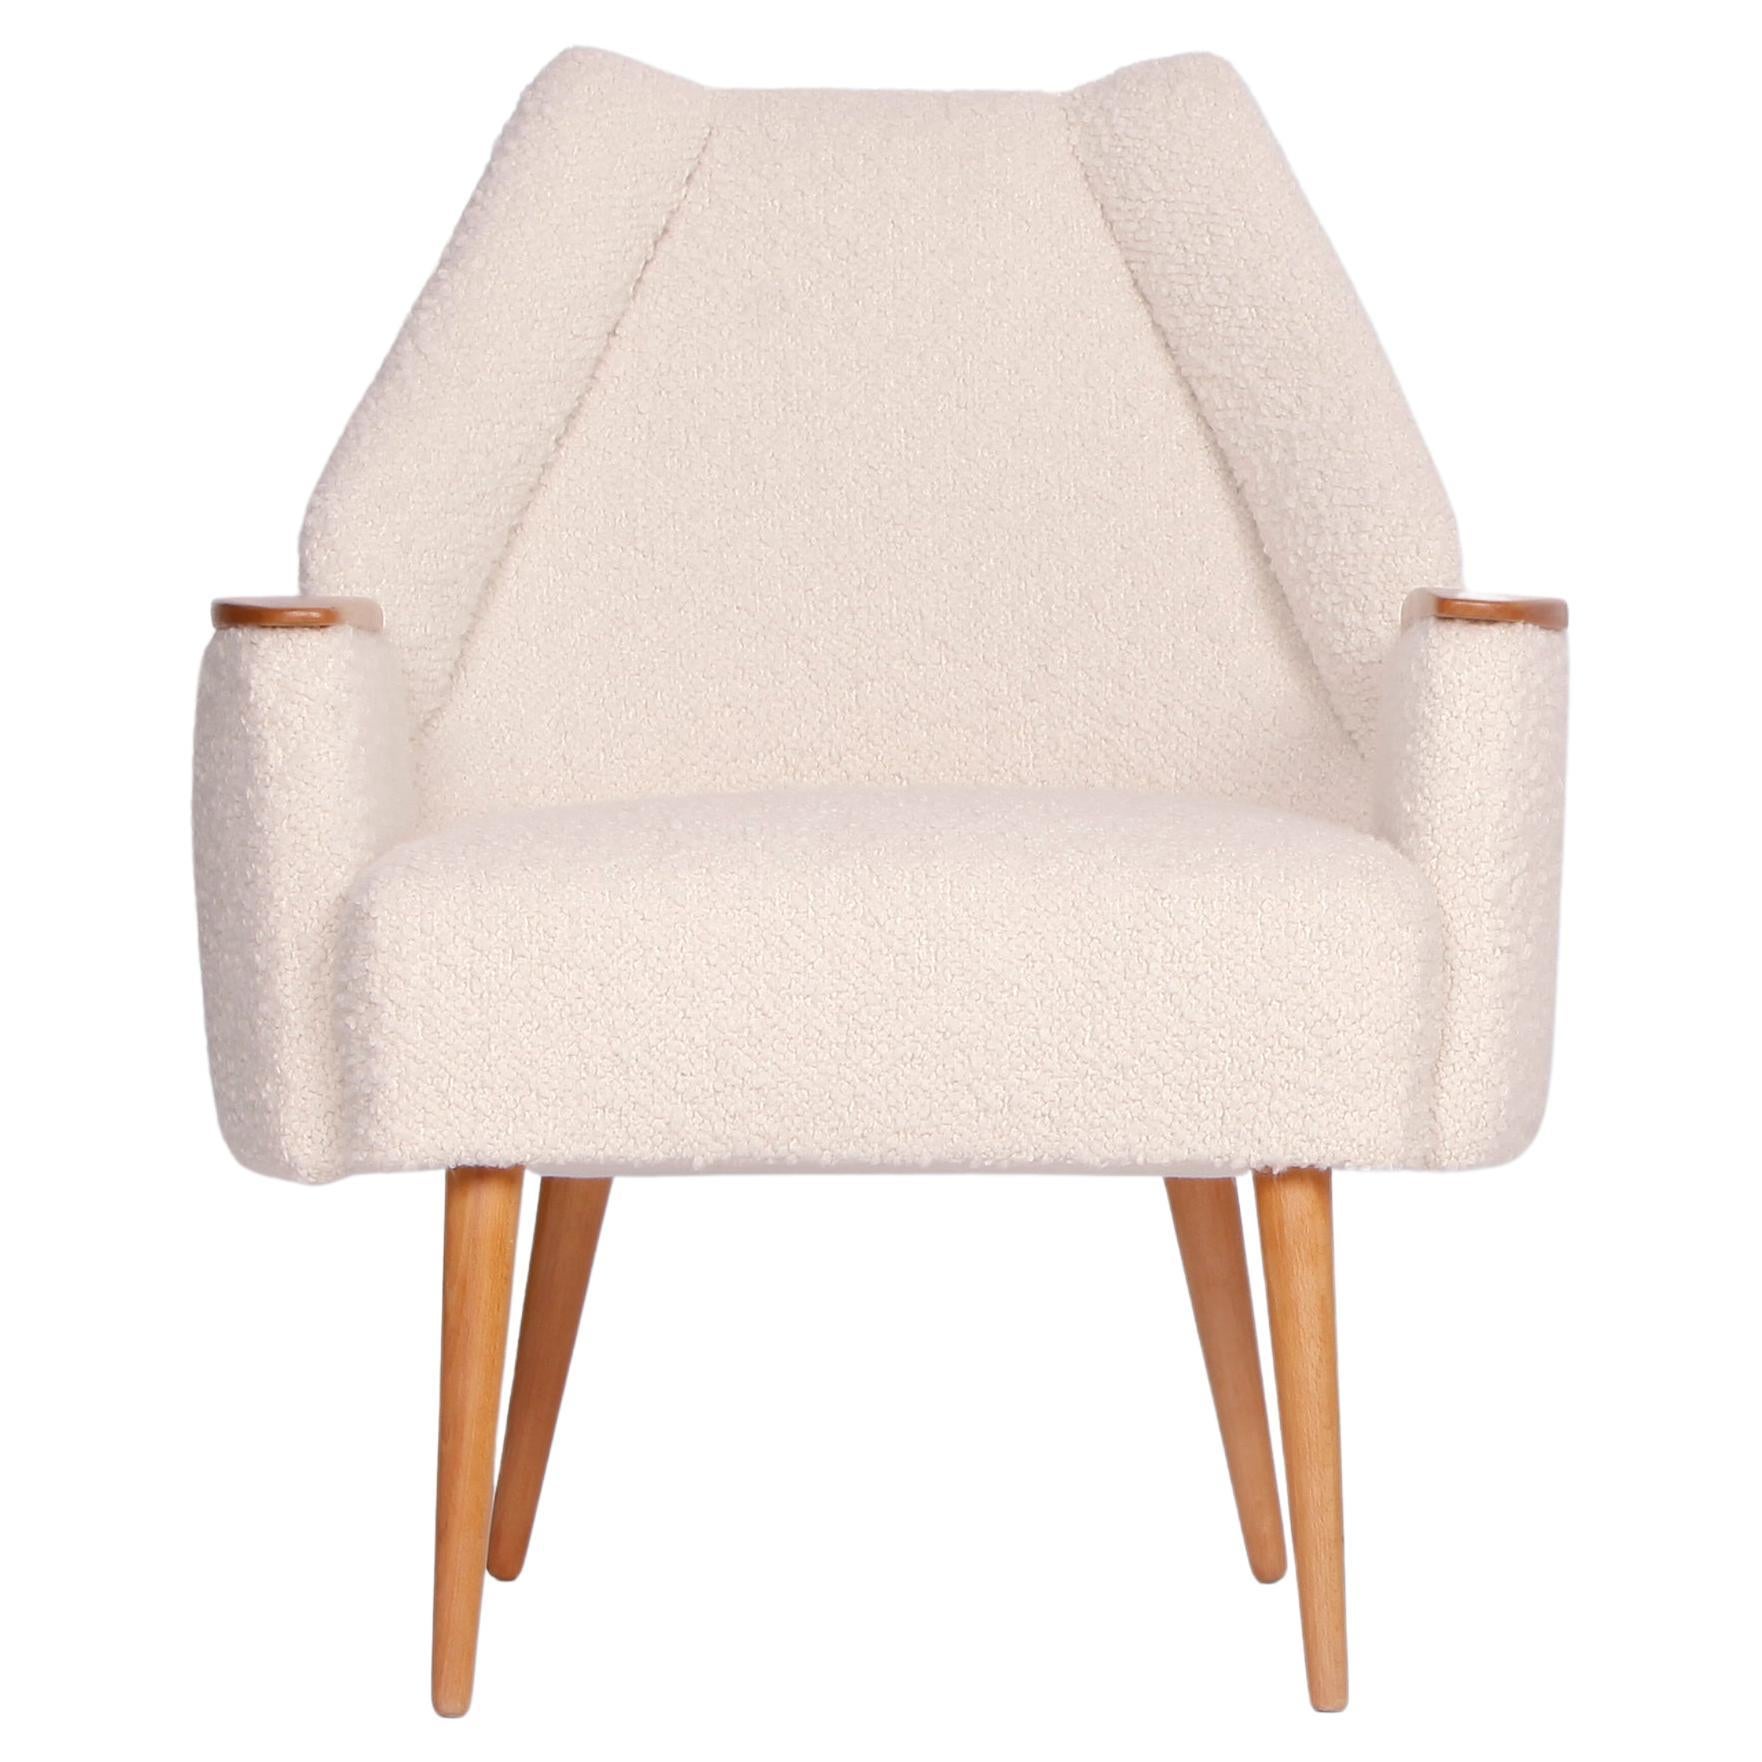 These armchairs were produced in the 1960s. They have been completely restored including new springs for the upholstery. For the cover we have chosen a beautifully fitting Boucle fabric from fine English wool. This model rarely appears ont the